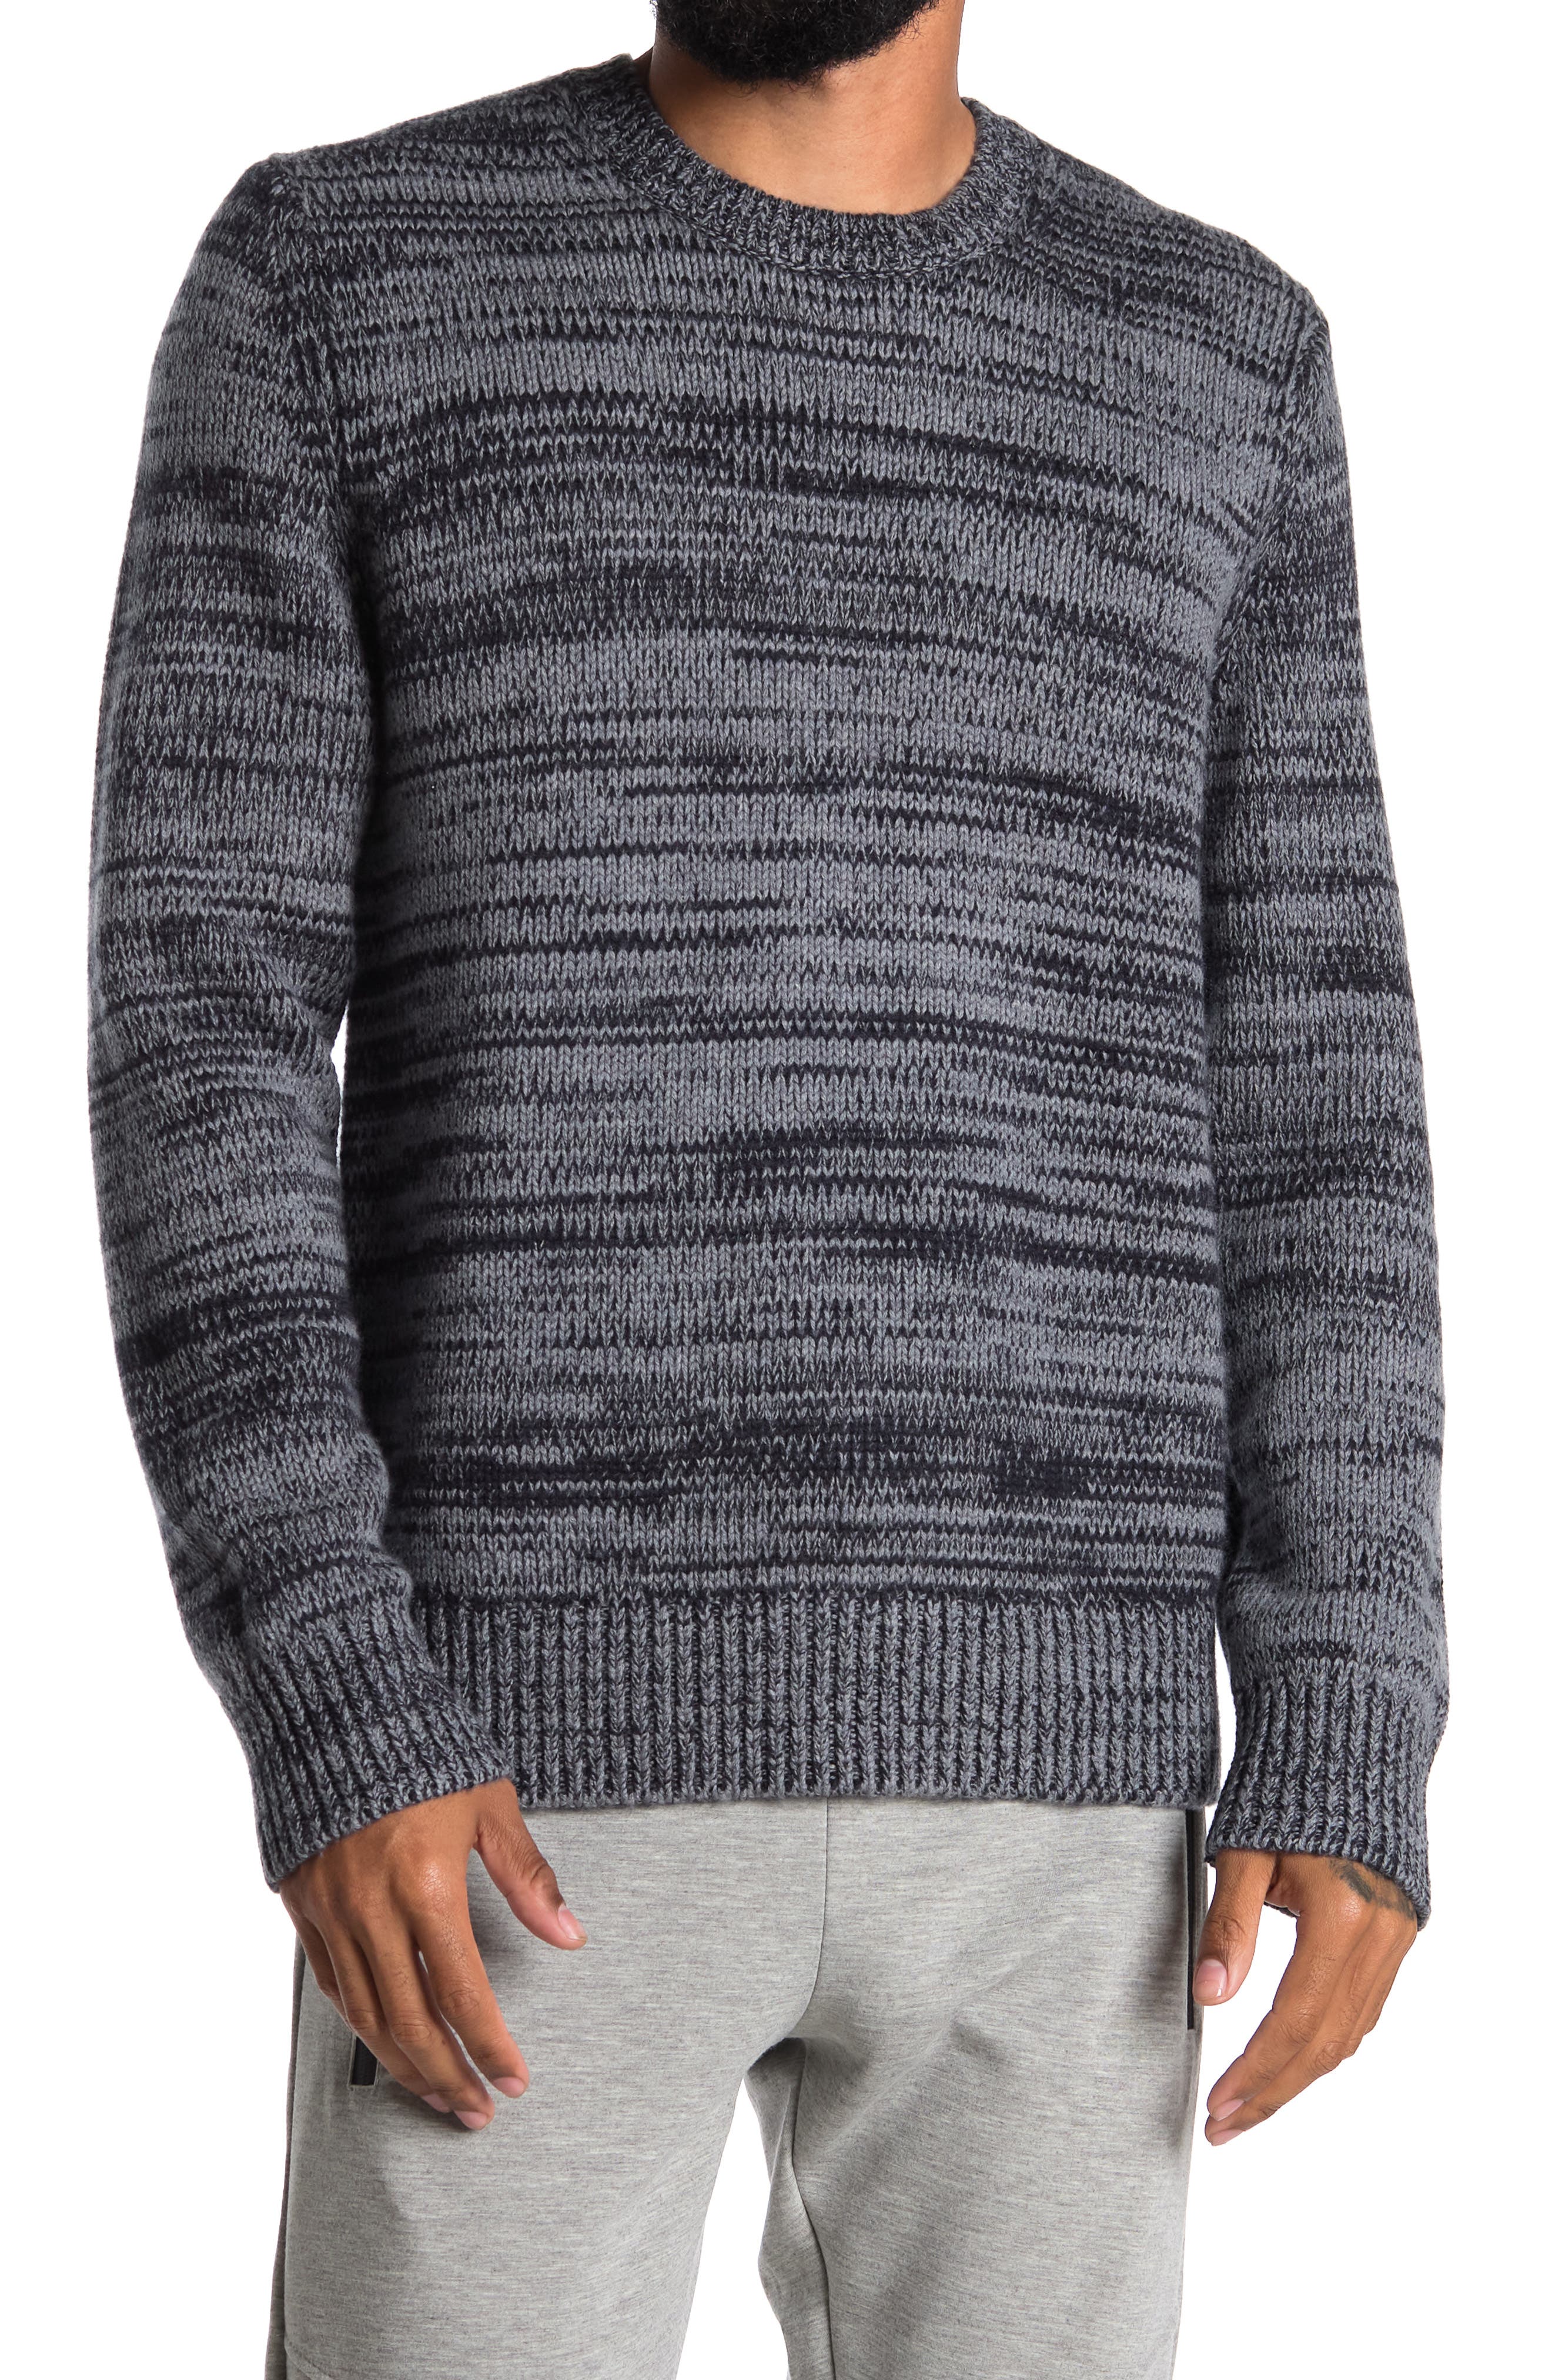 VINCE Men/'s Marled Cable-knit Crew Neck Sweater $395 NWT